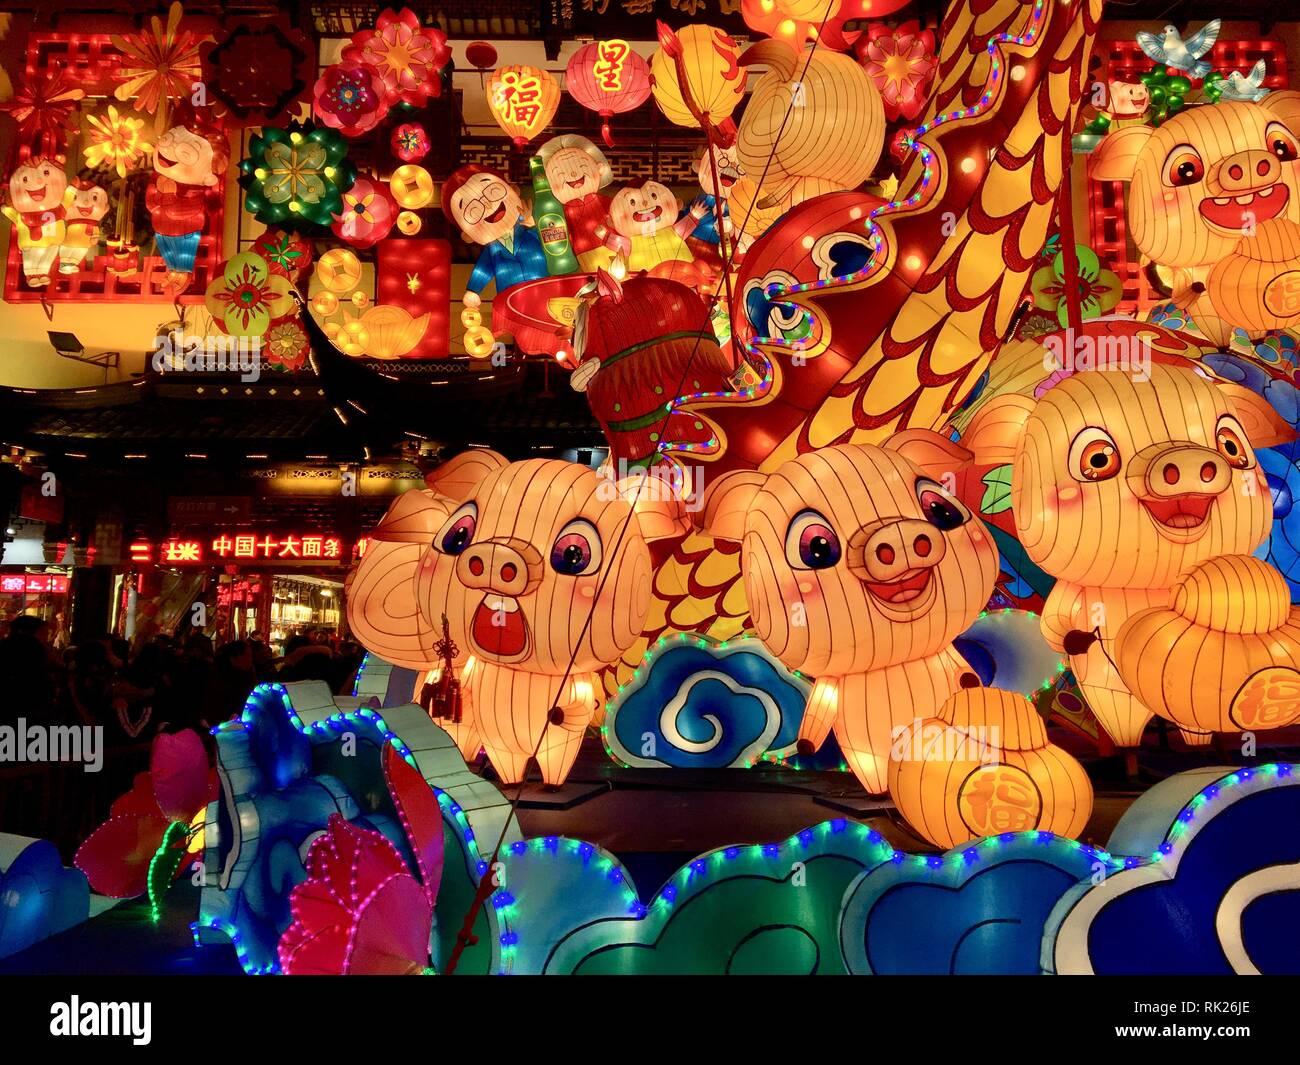 Colorful, illuminated Chinese New Year decoration for the year of the pig in Yuyuan Garden. 02/07/2019. Shanghai, China. Stock Photo